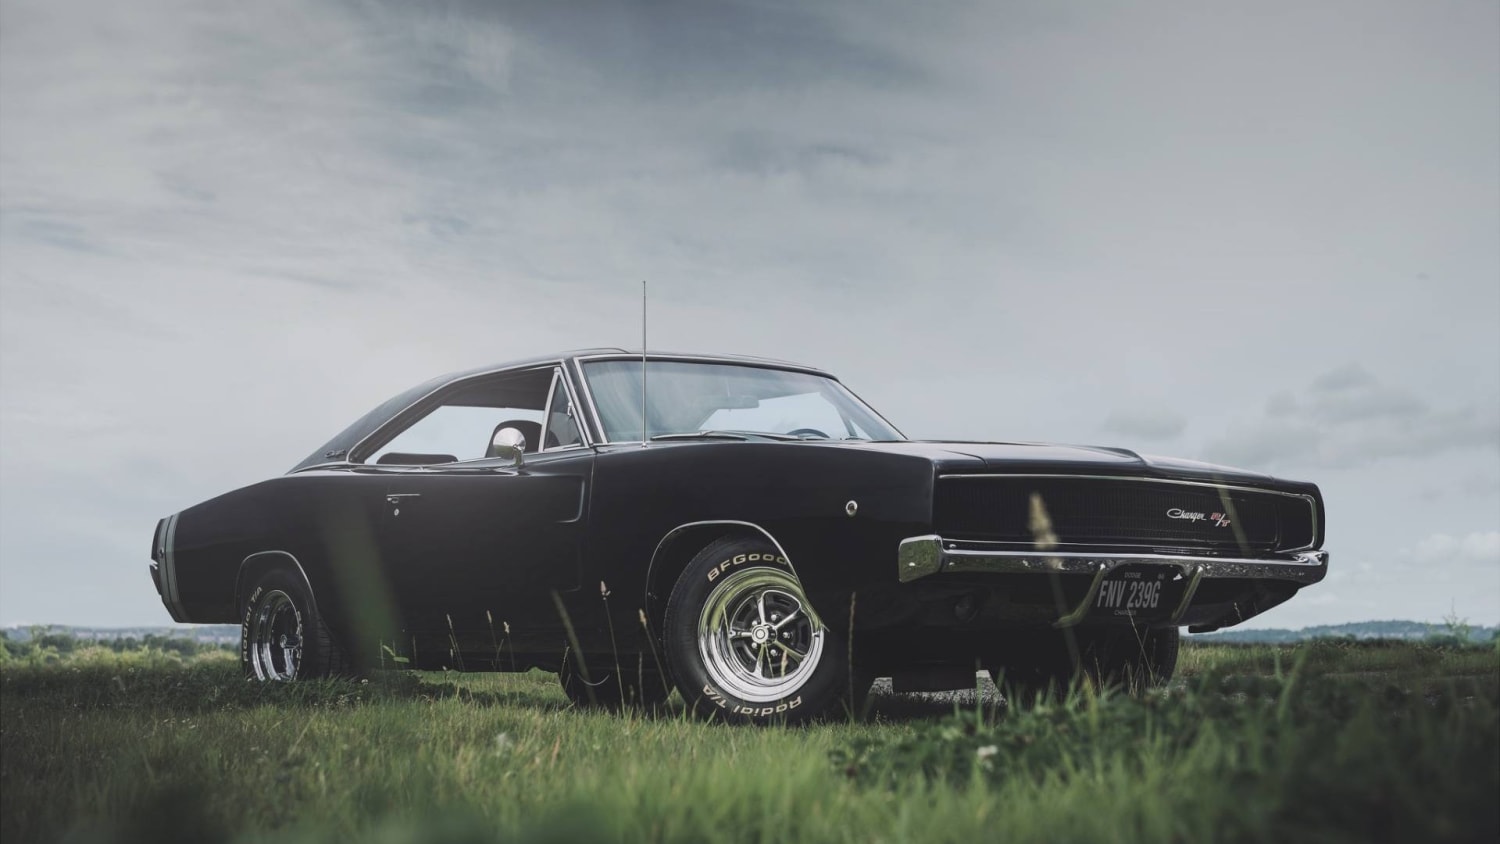 Dodge charger